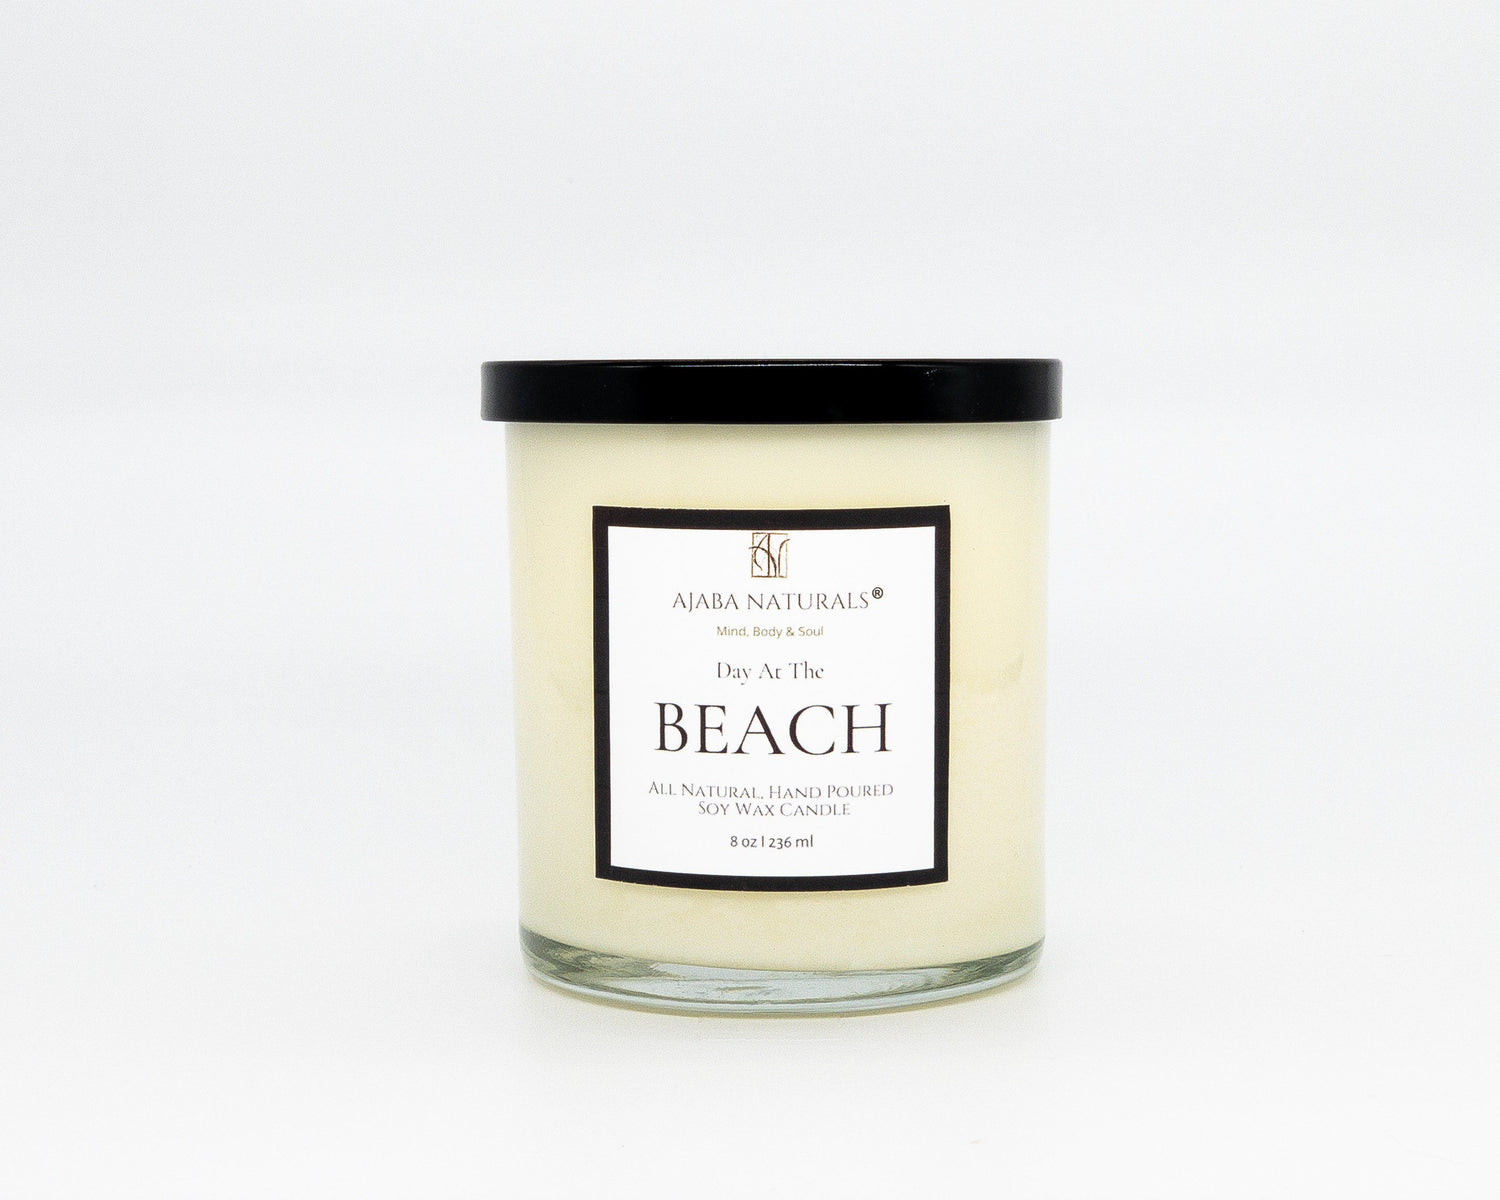 Day At The Beach All Natural Hand Poured Soy Wax Candle Candle AJABA NATURALS® 